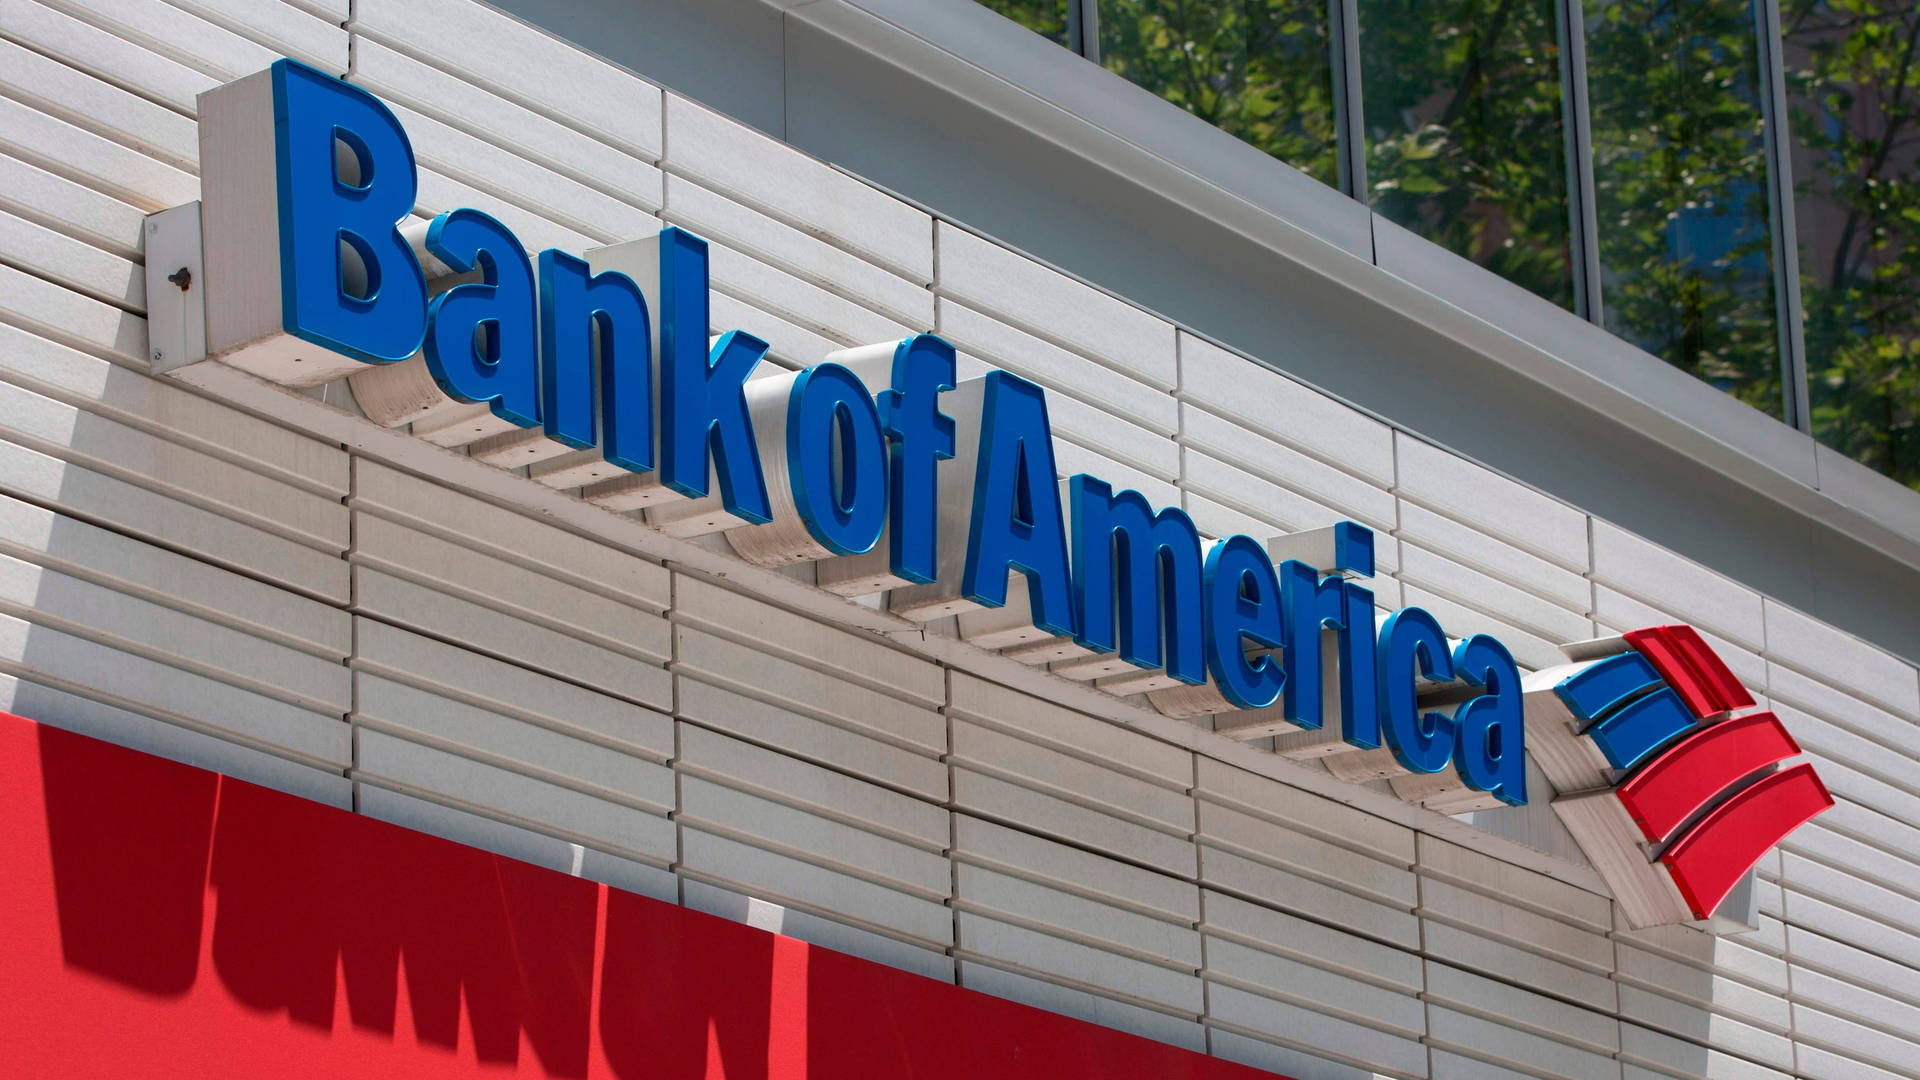 Bank Of America 3d Signage